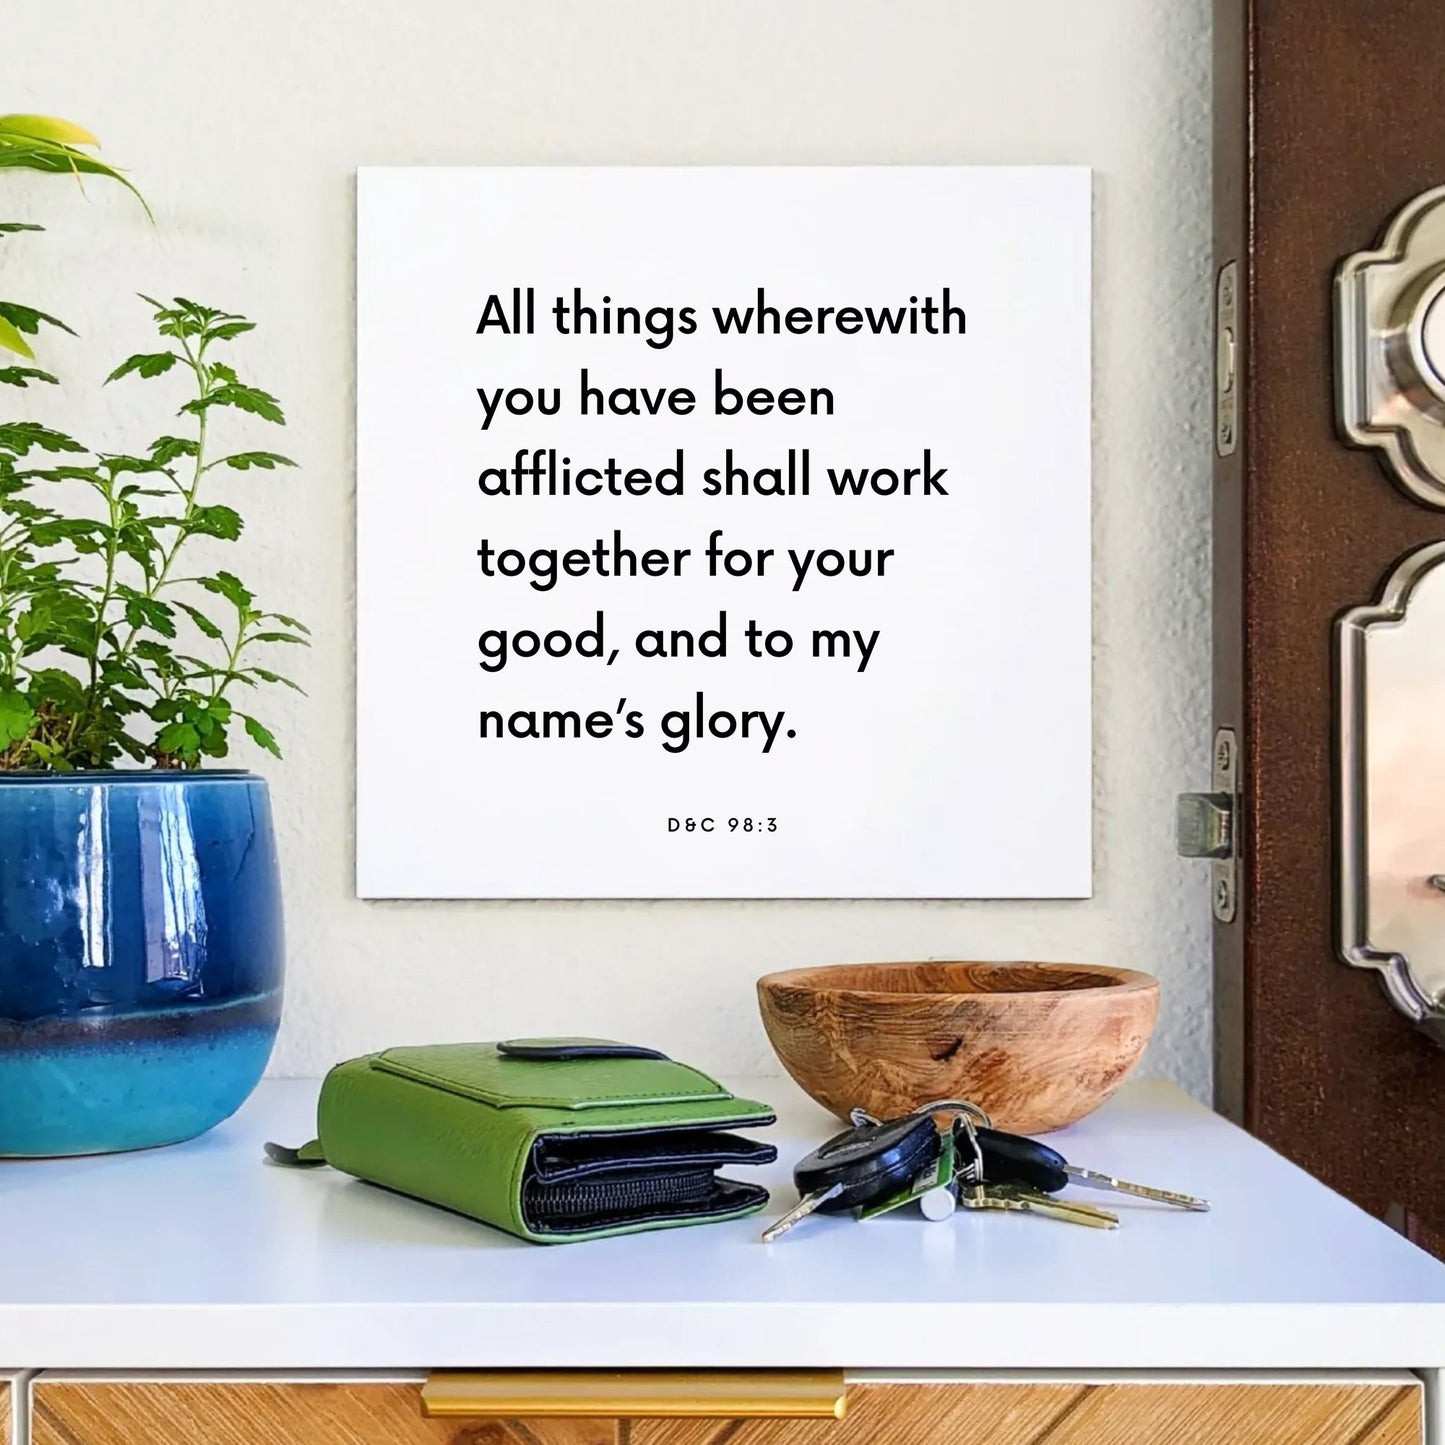 Entryway mouting of the scripture tile for D&C 98:3 - "All things wherewith you have been afflicted"